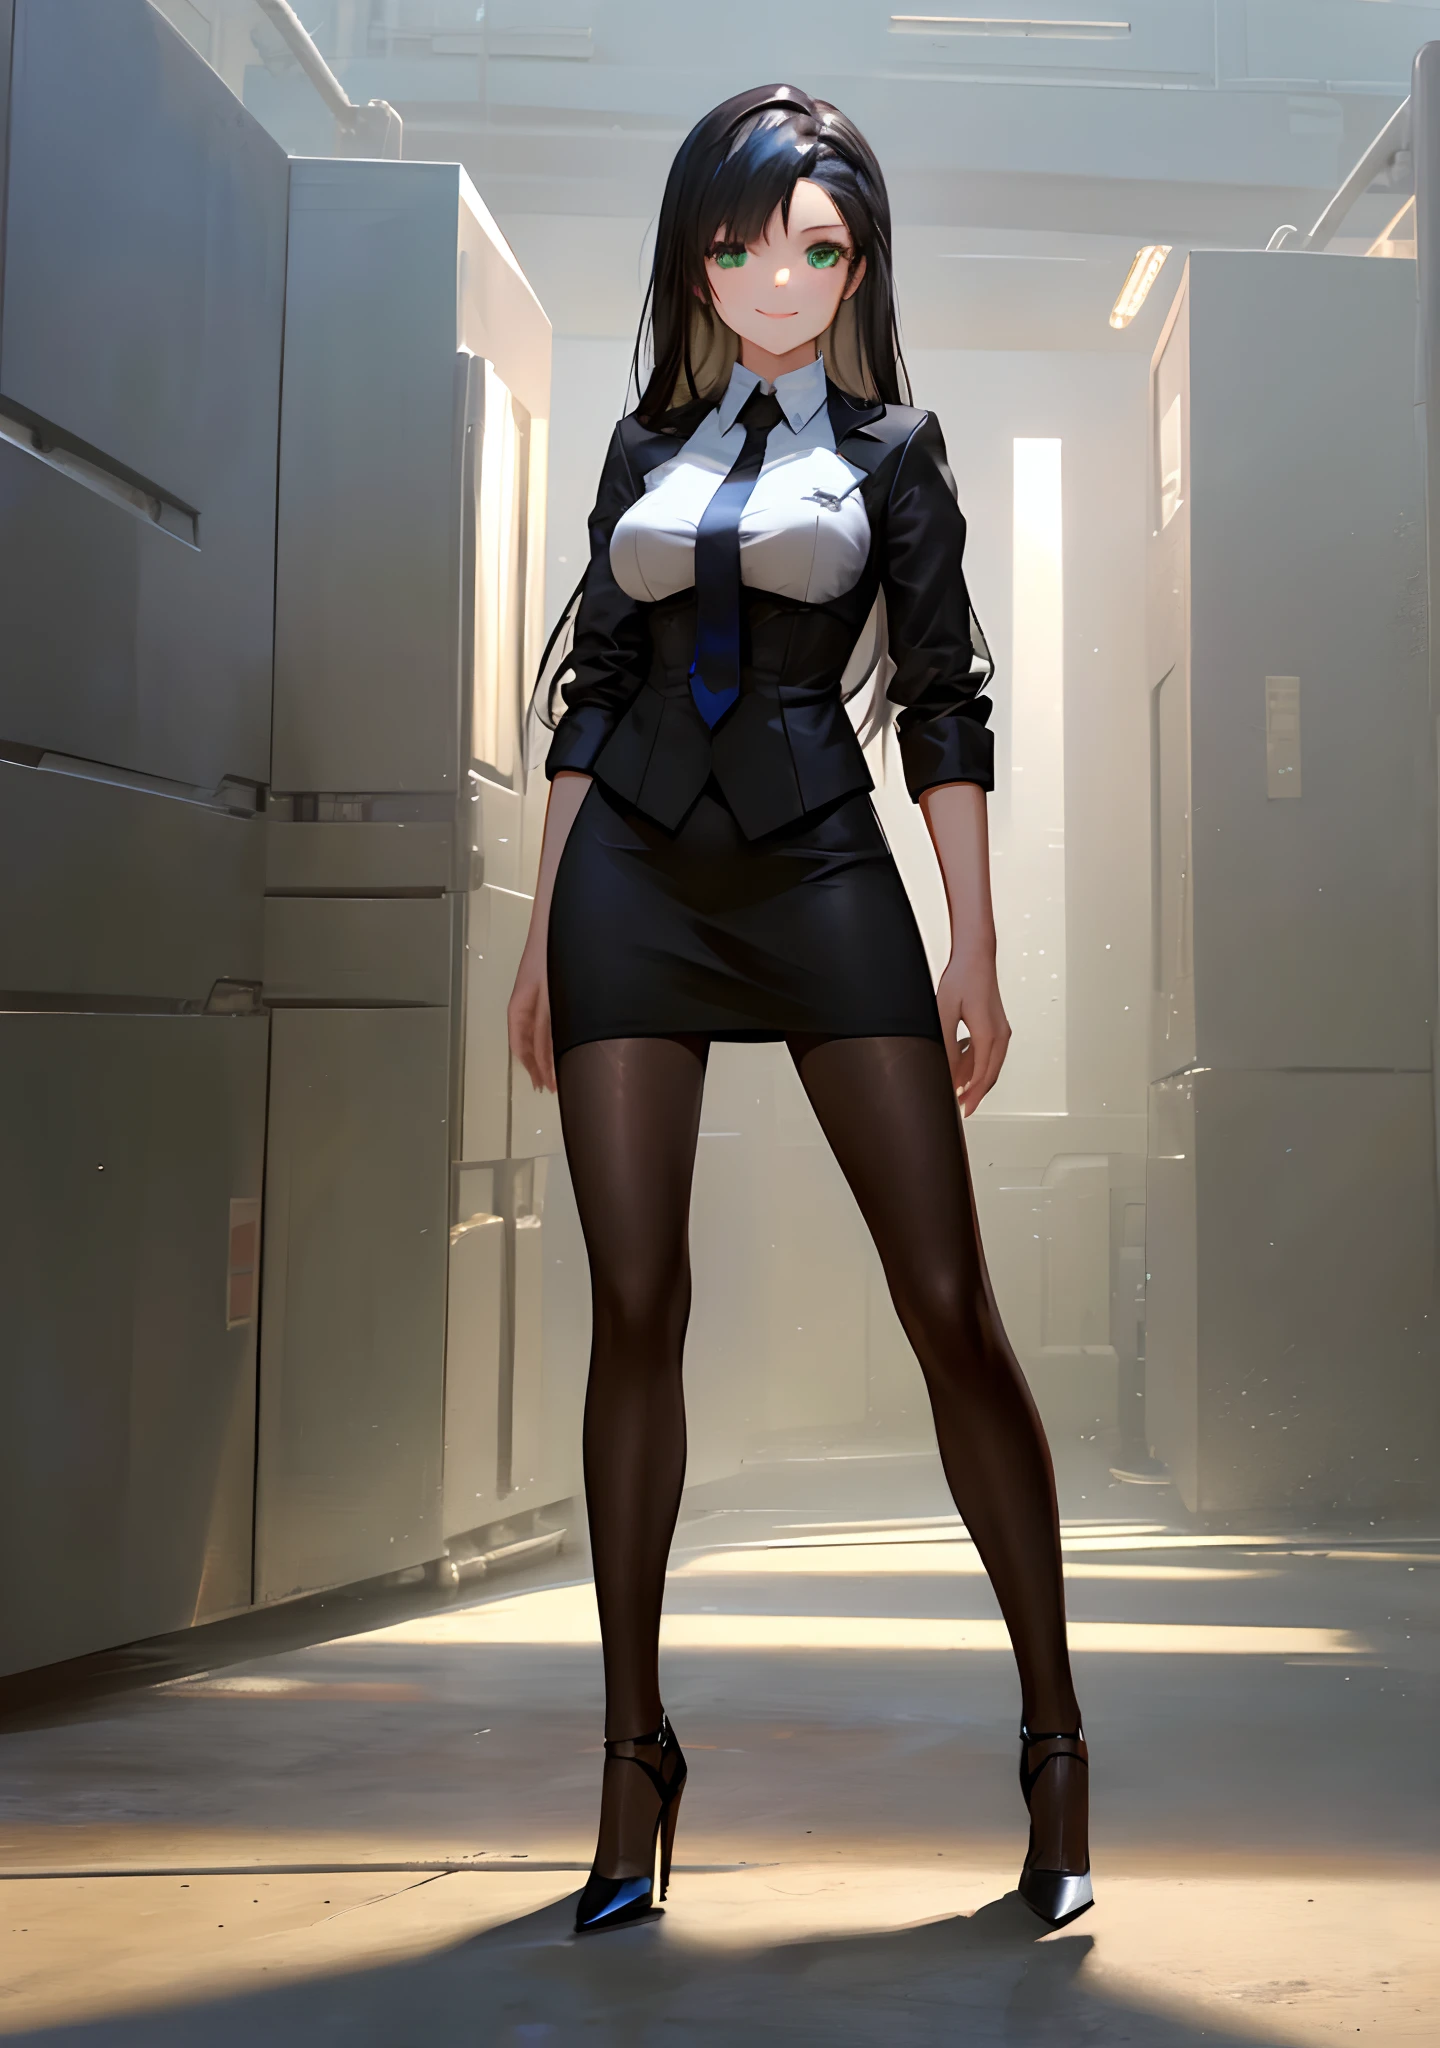 (Best quality, masterpiece:1.5), solo, standing, beautiful shot of a beautiful black haired android woman with shimmering green eyes, medium sized breasts, and detailed seams along her body, wearing a form fitting business suit and tie, pencil skirt, and matching high heels. She’s posing confidently, and has a warm smile on her face. The background shows she’s in a futuristic version of New York City, at night.